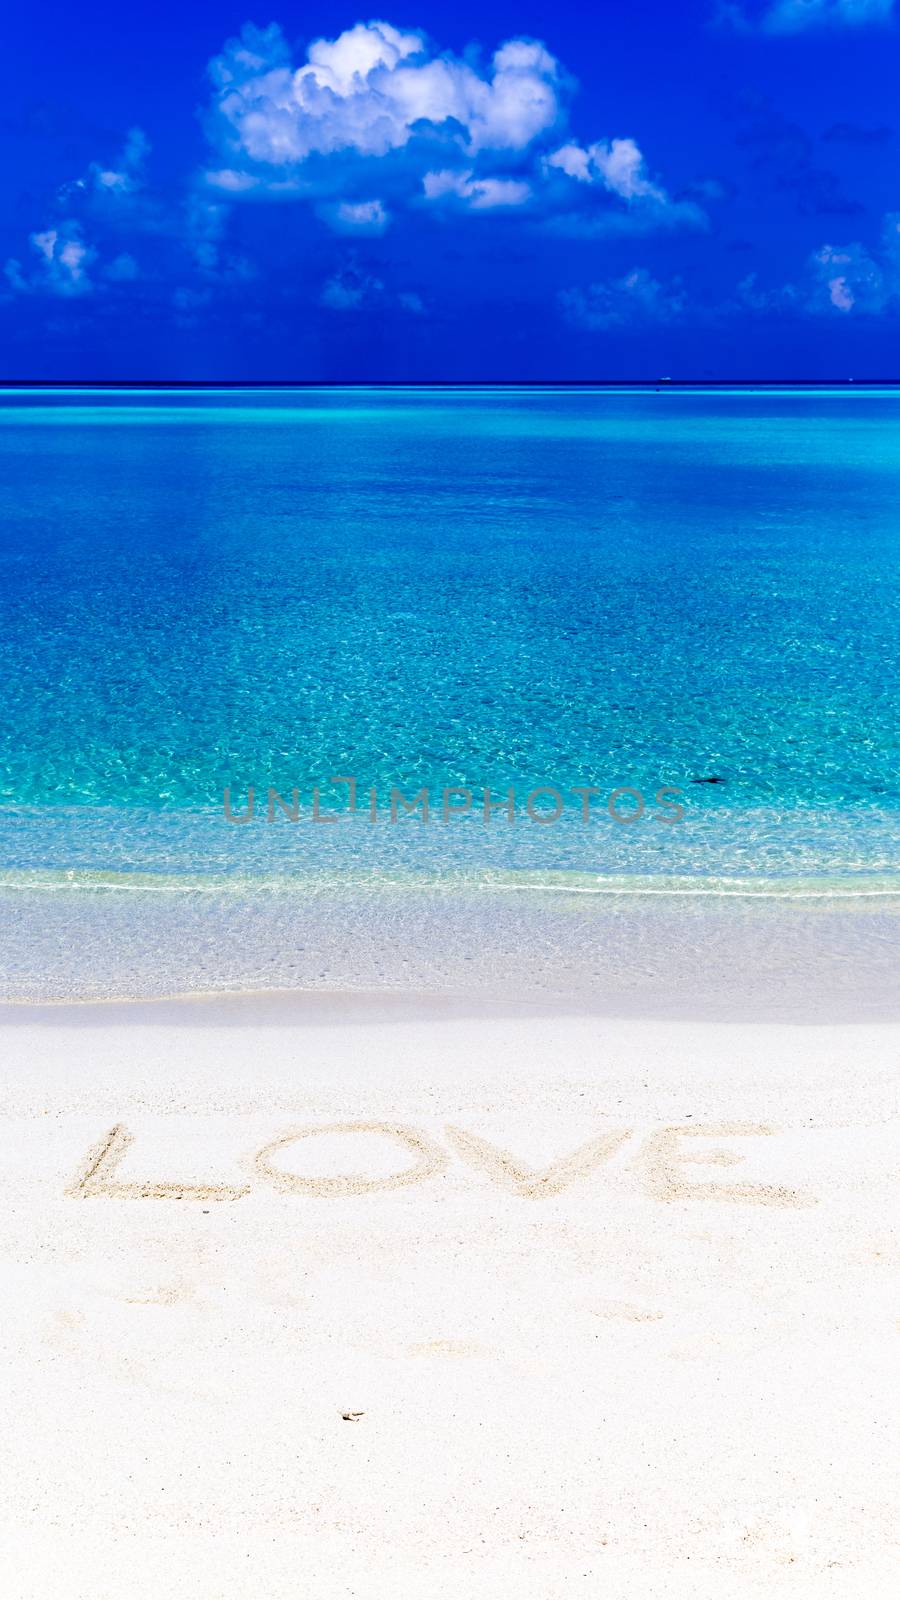 Word love written on sand in Maldives with the lagoon at background.